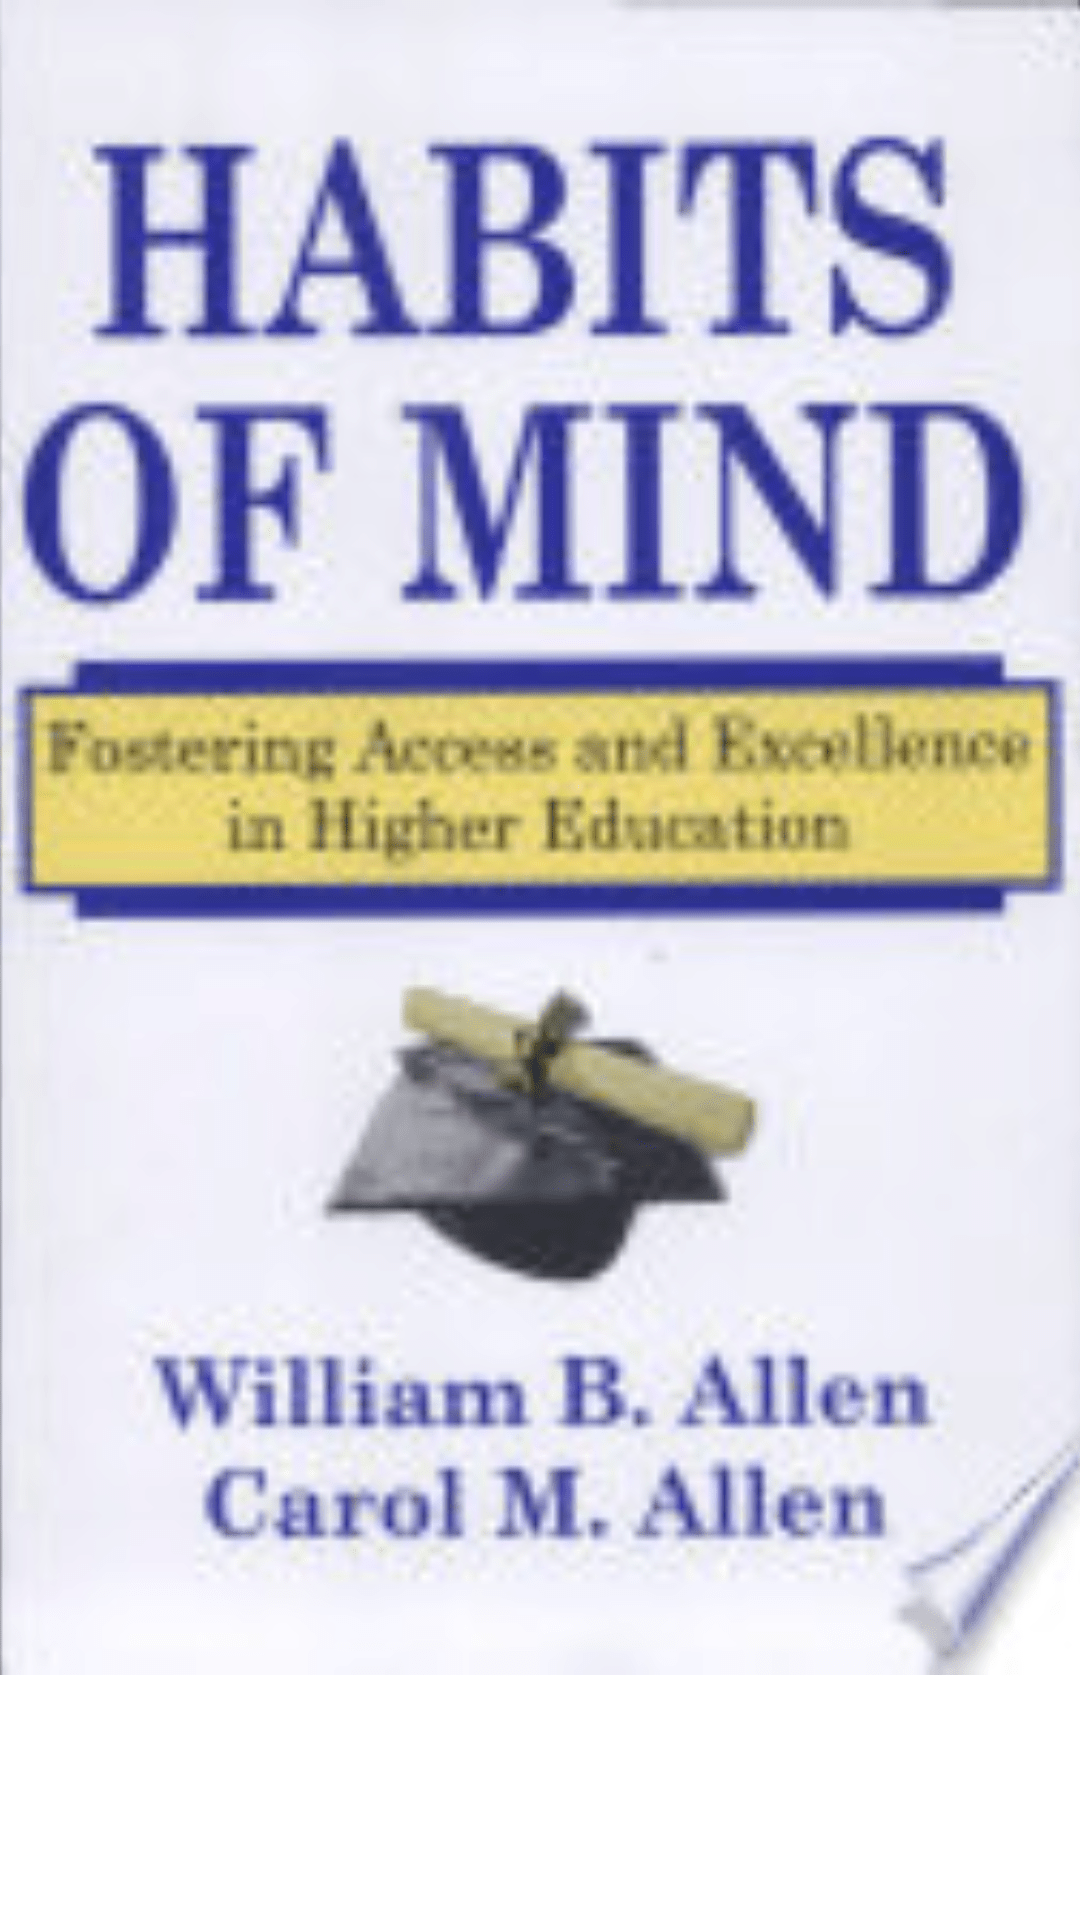 Habits of Mind : Fostering Access and Excellence in Higher Education